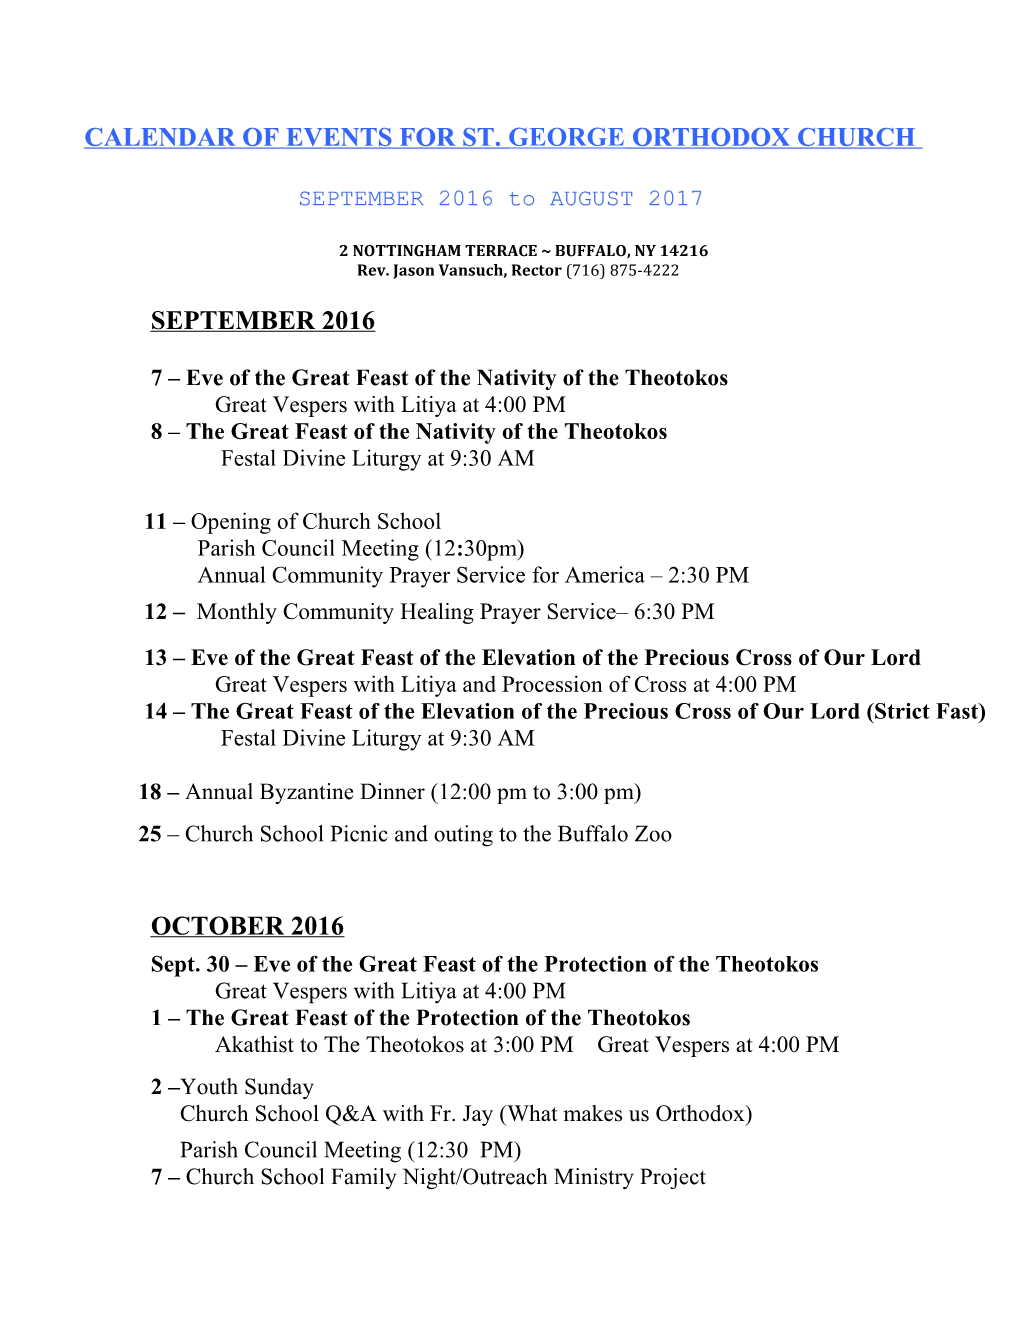 Calendar of Events for St. George Orthodox Church